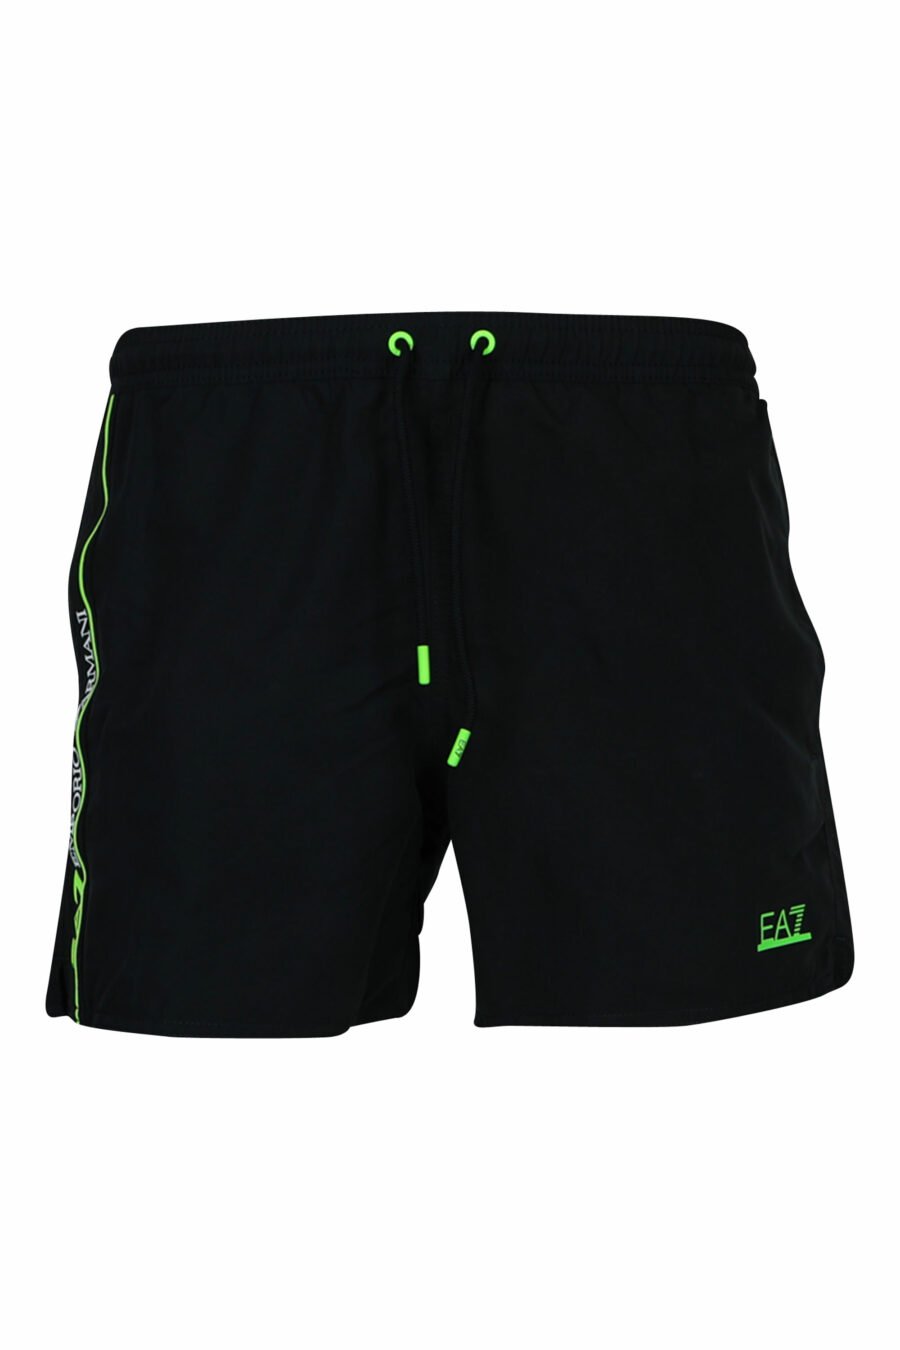 Black swimming costume with side "lux identity" maxilogo with lime green line - 8058947151622